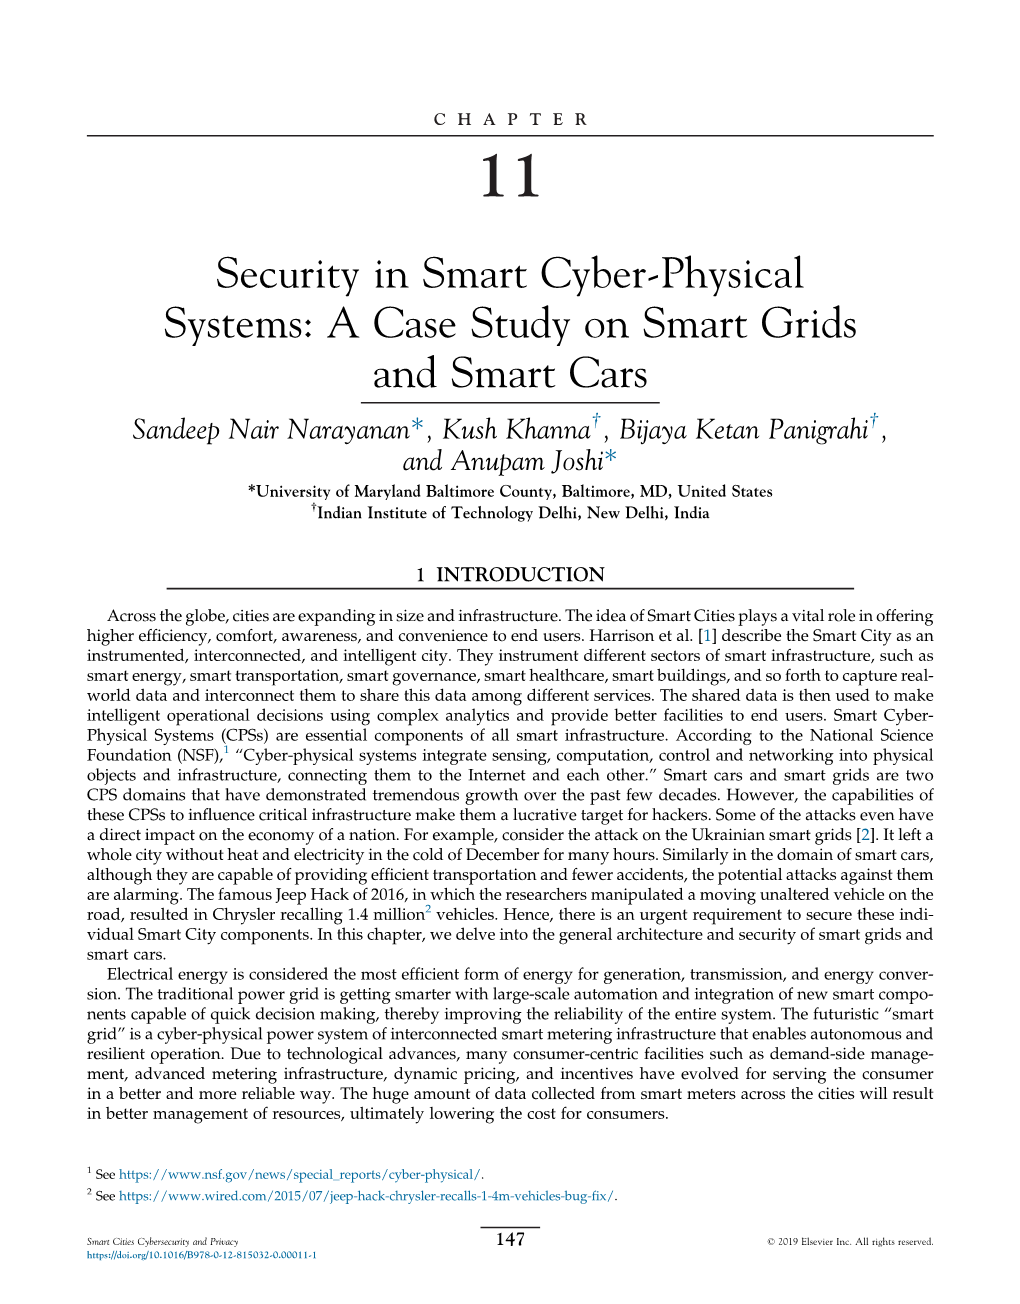 Security in Smart Cyber-Physical Systems